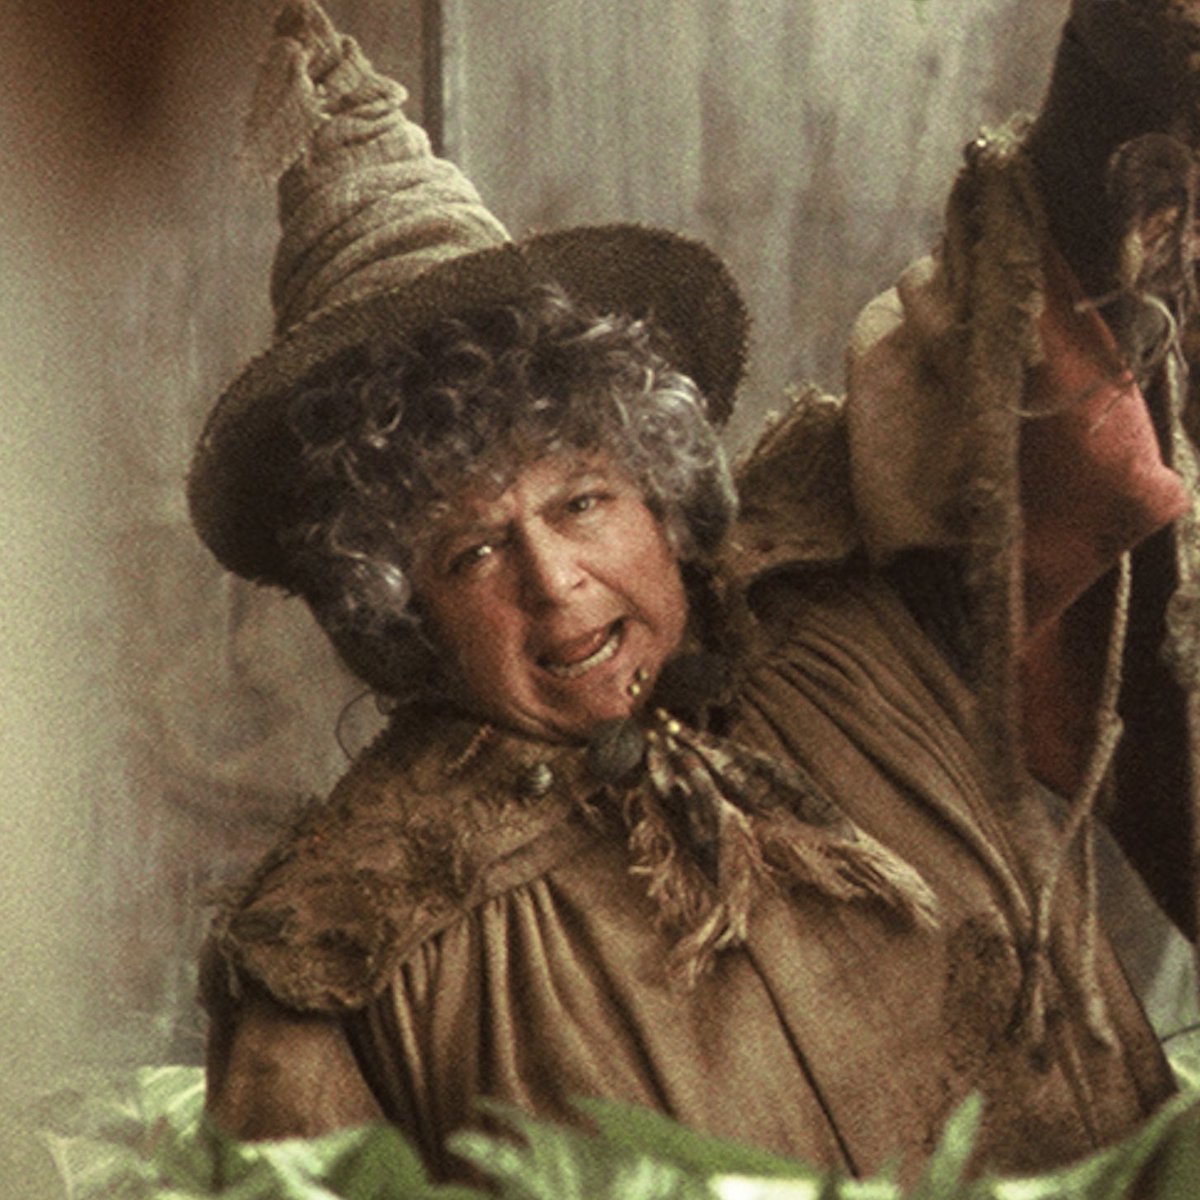 Miriam Margolyes, the actress who played Professor Sprout in ‘Harry Potter,’ says she’s worried about adults who are still obsessed with the series:

“It was 25 years ago and it’s for children.”